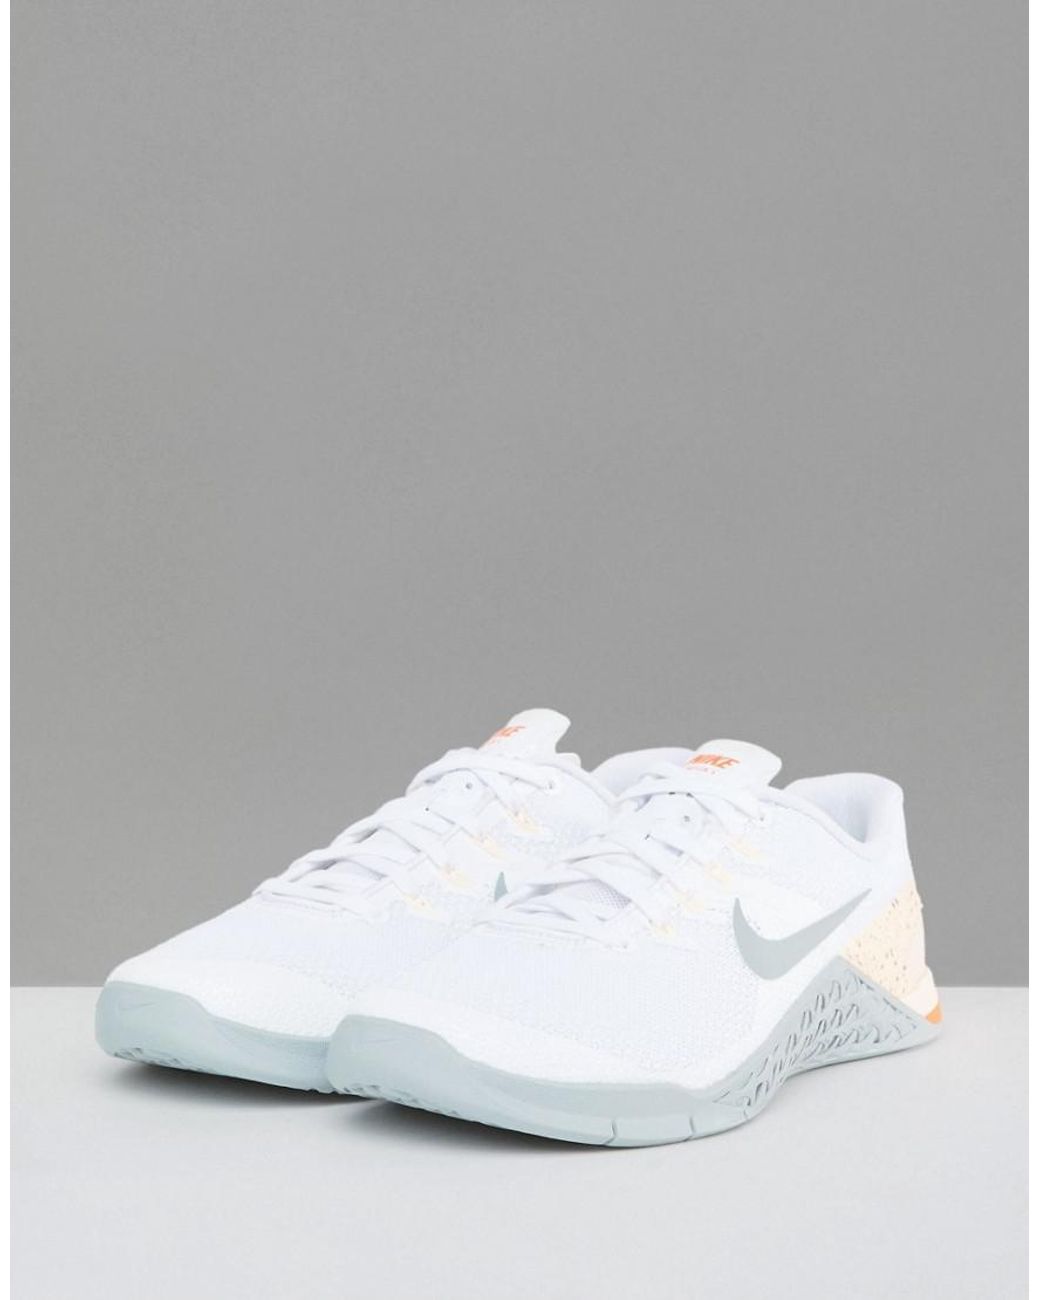 Nike Metcon Trainers metcon trainers womens In White And Peach